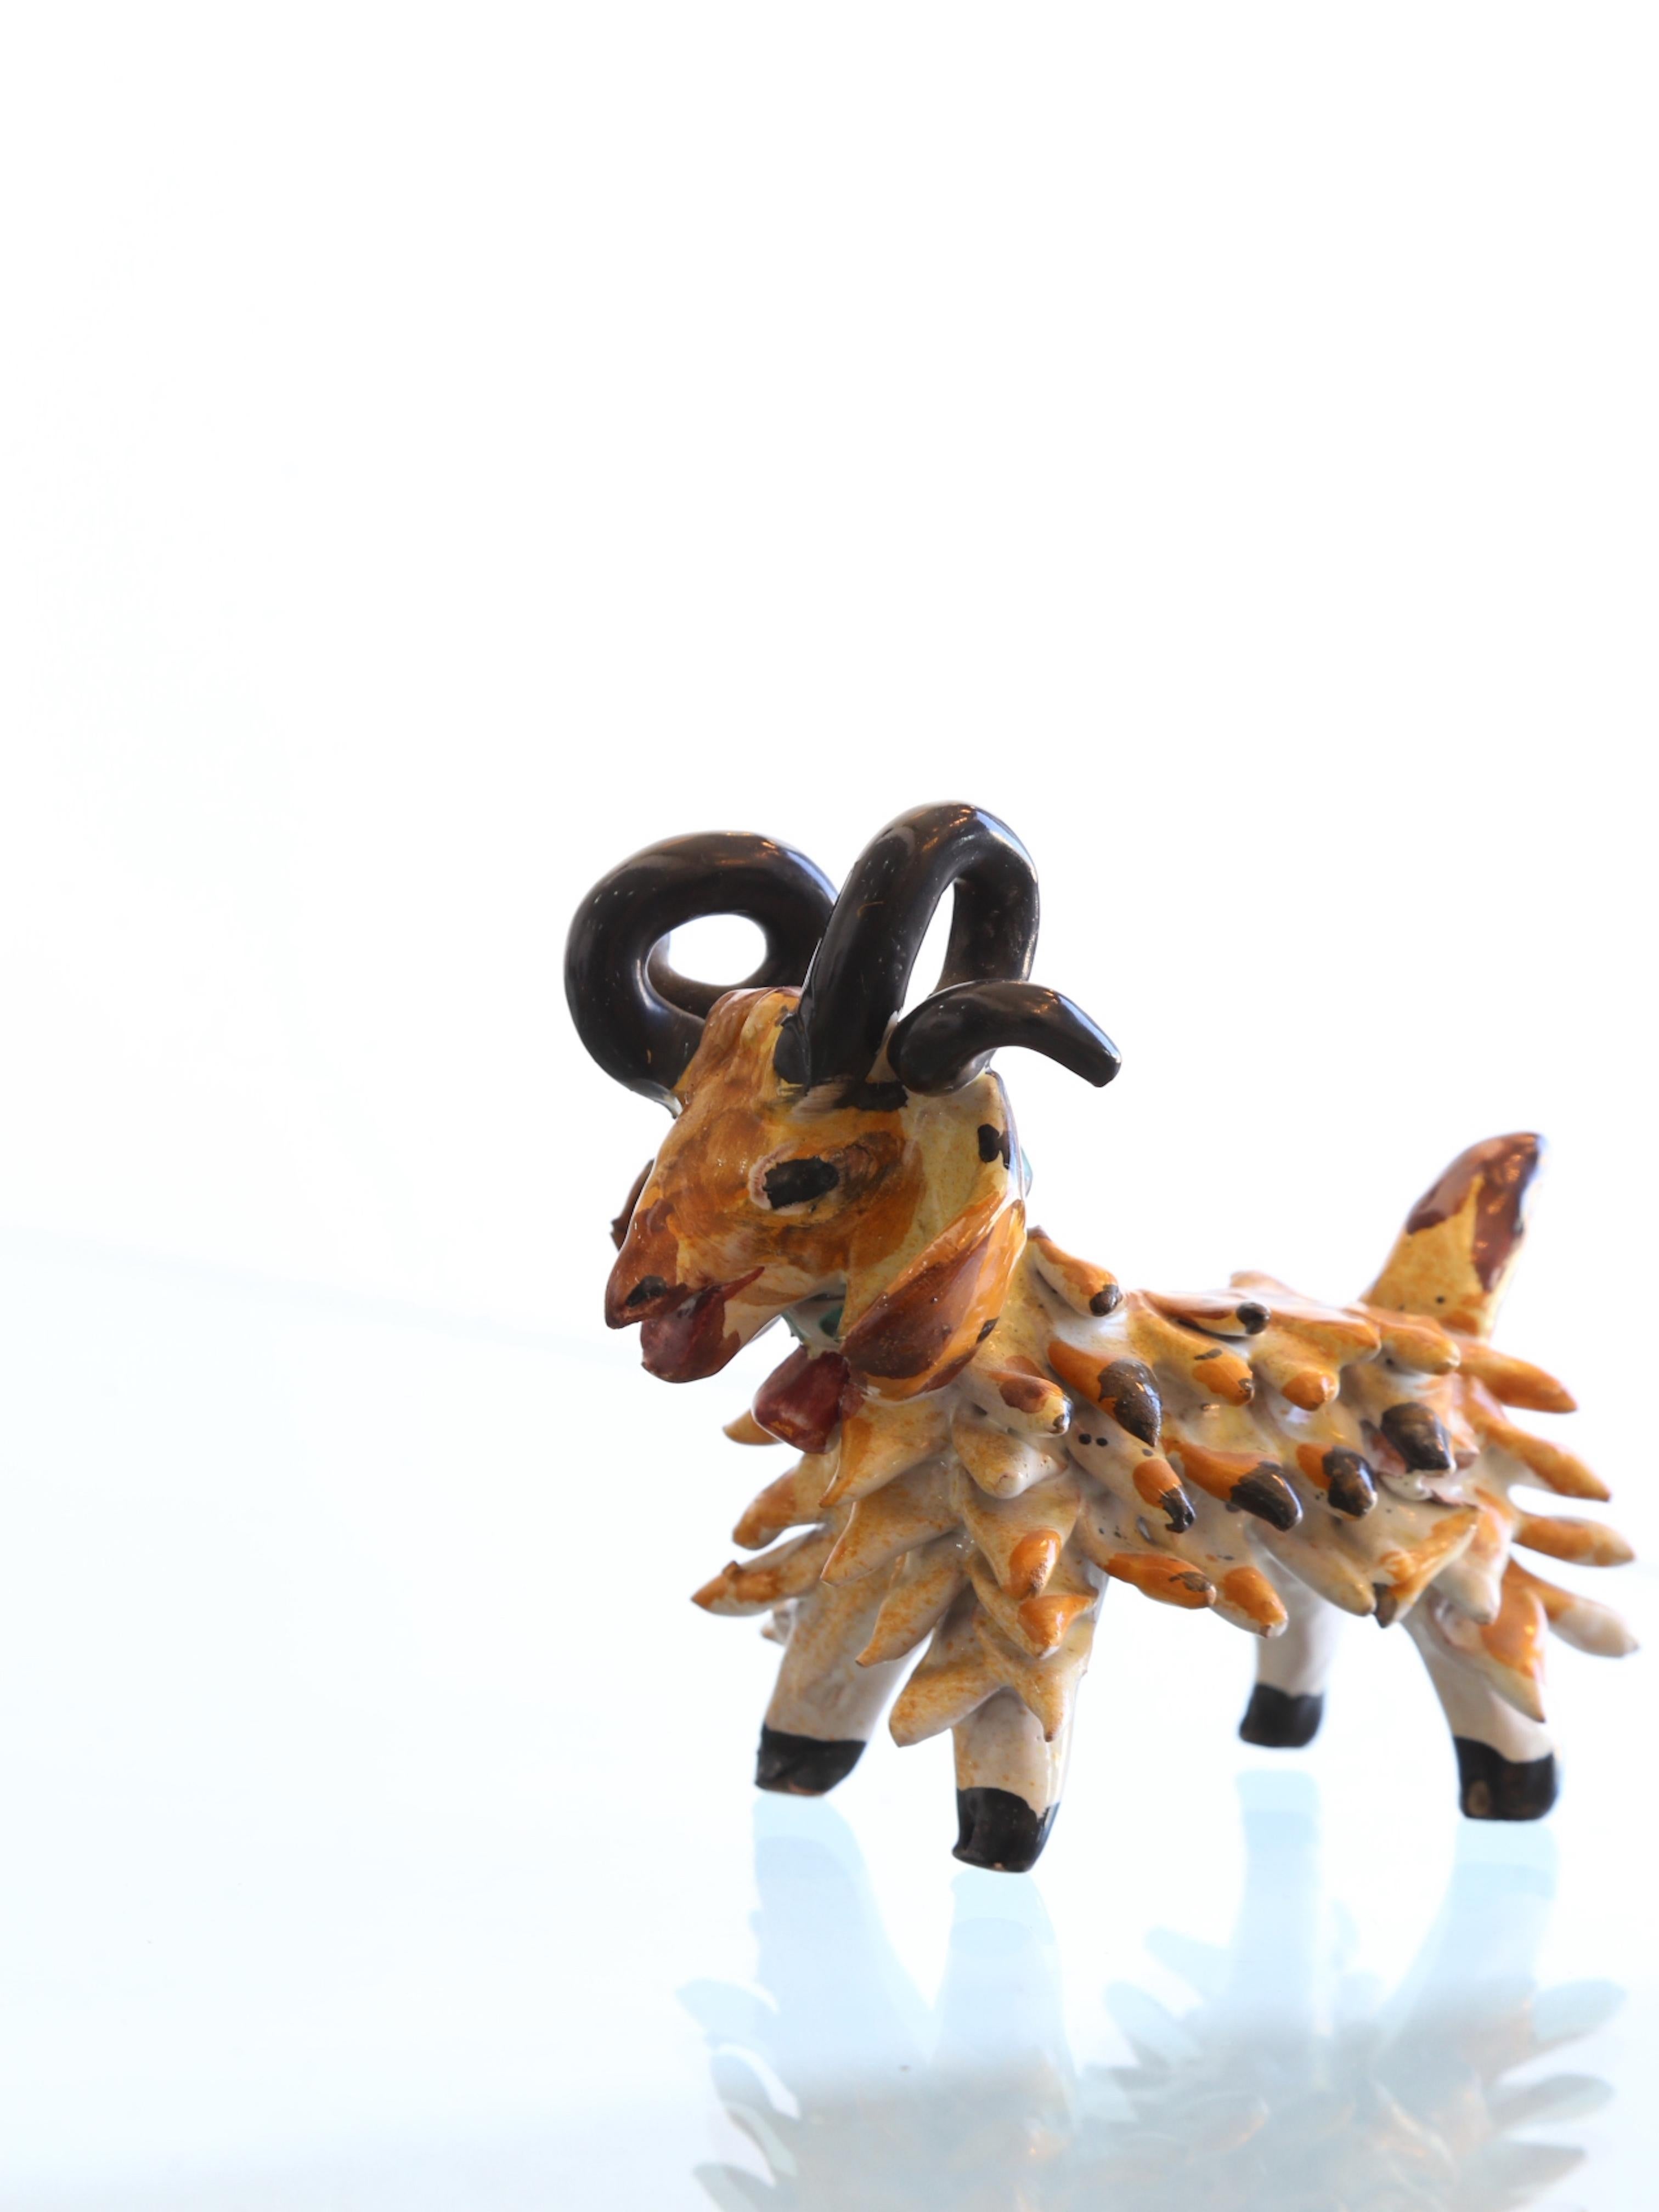 Hand-Crafted Italian Handcrafted Animal Sculpture, 1960s For Sale